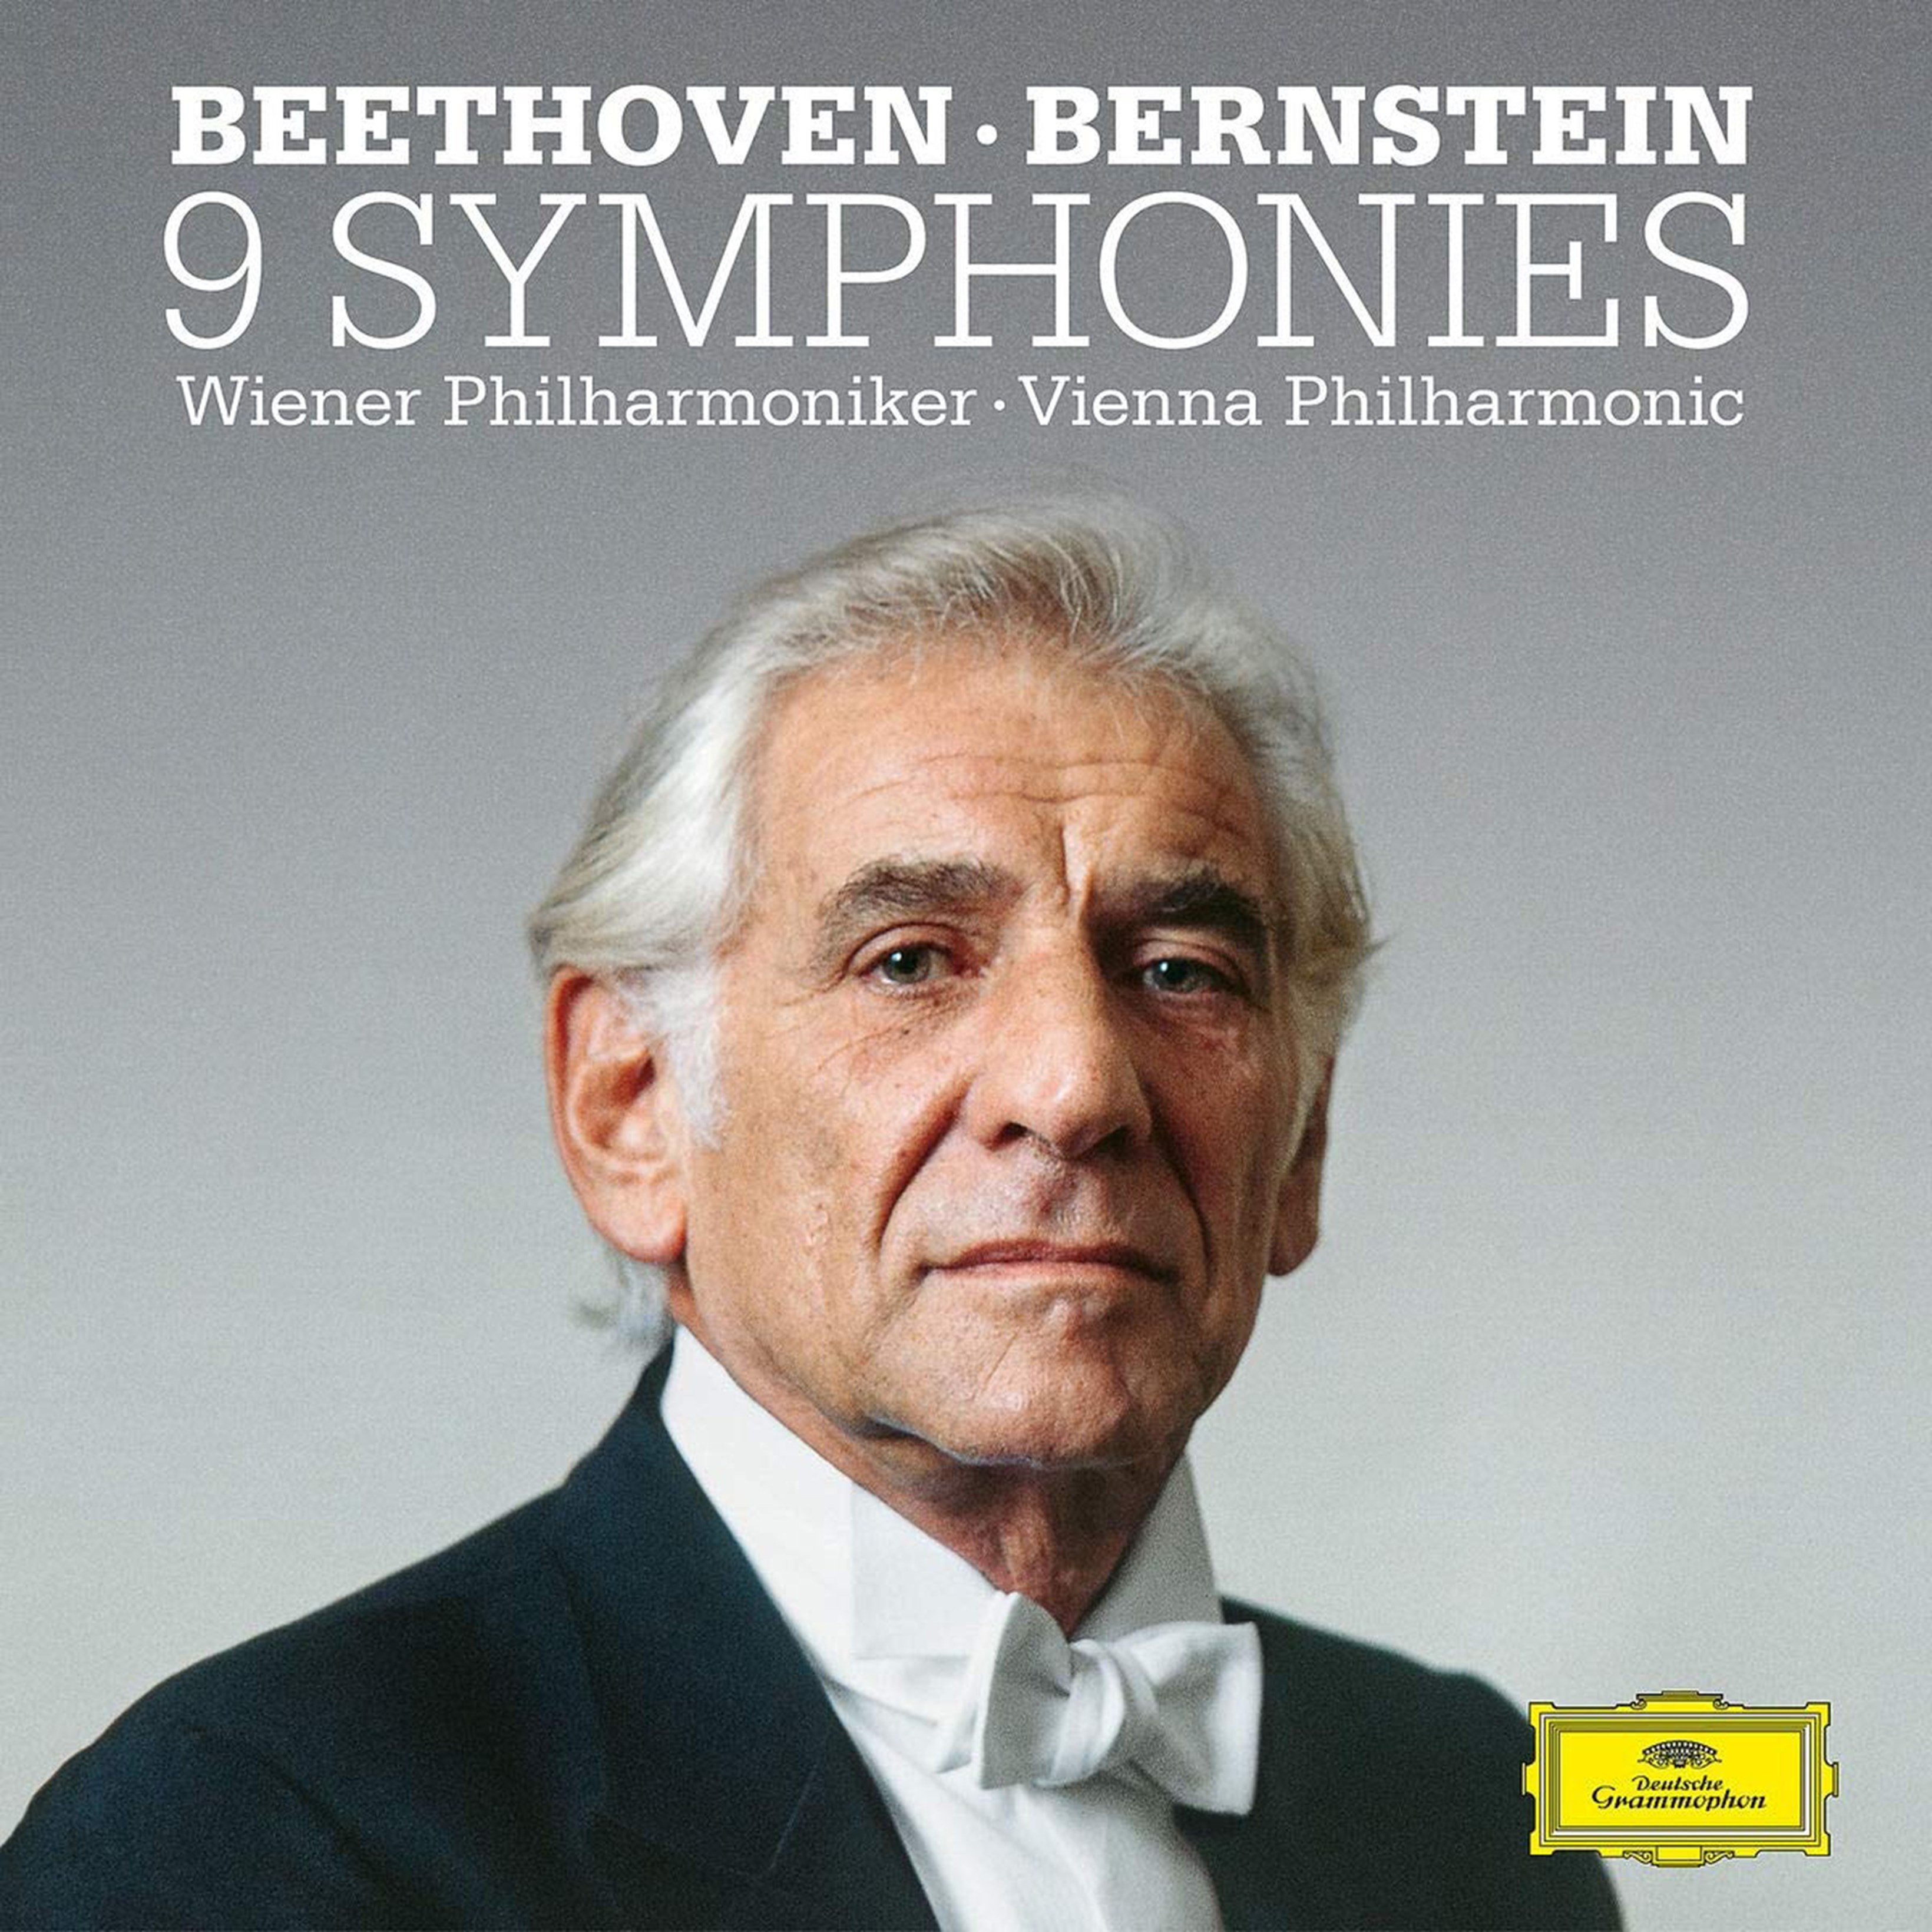 Beethoven 9 Symphonies CD/Bluray Album Free shipping over £20